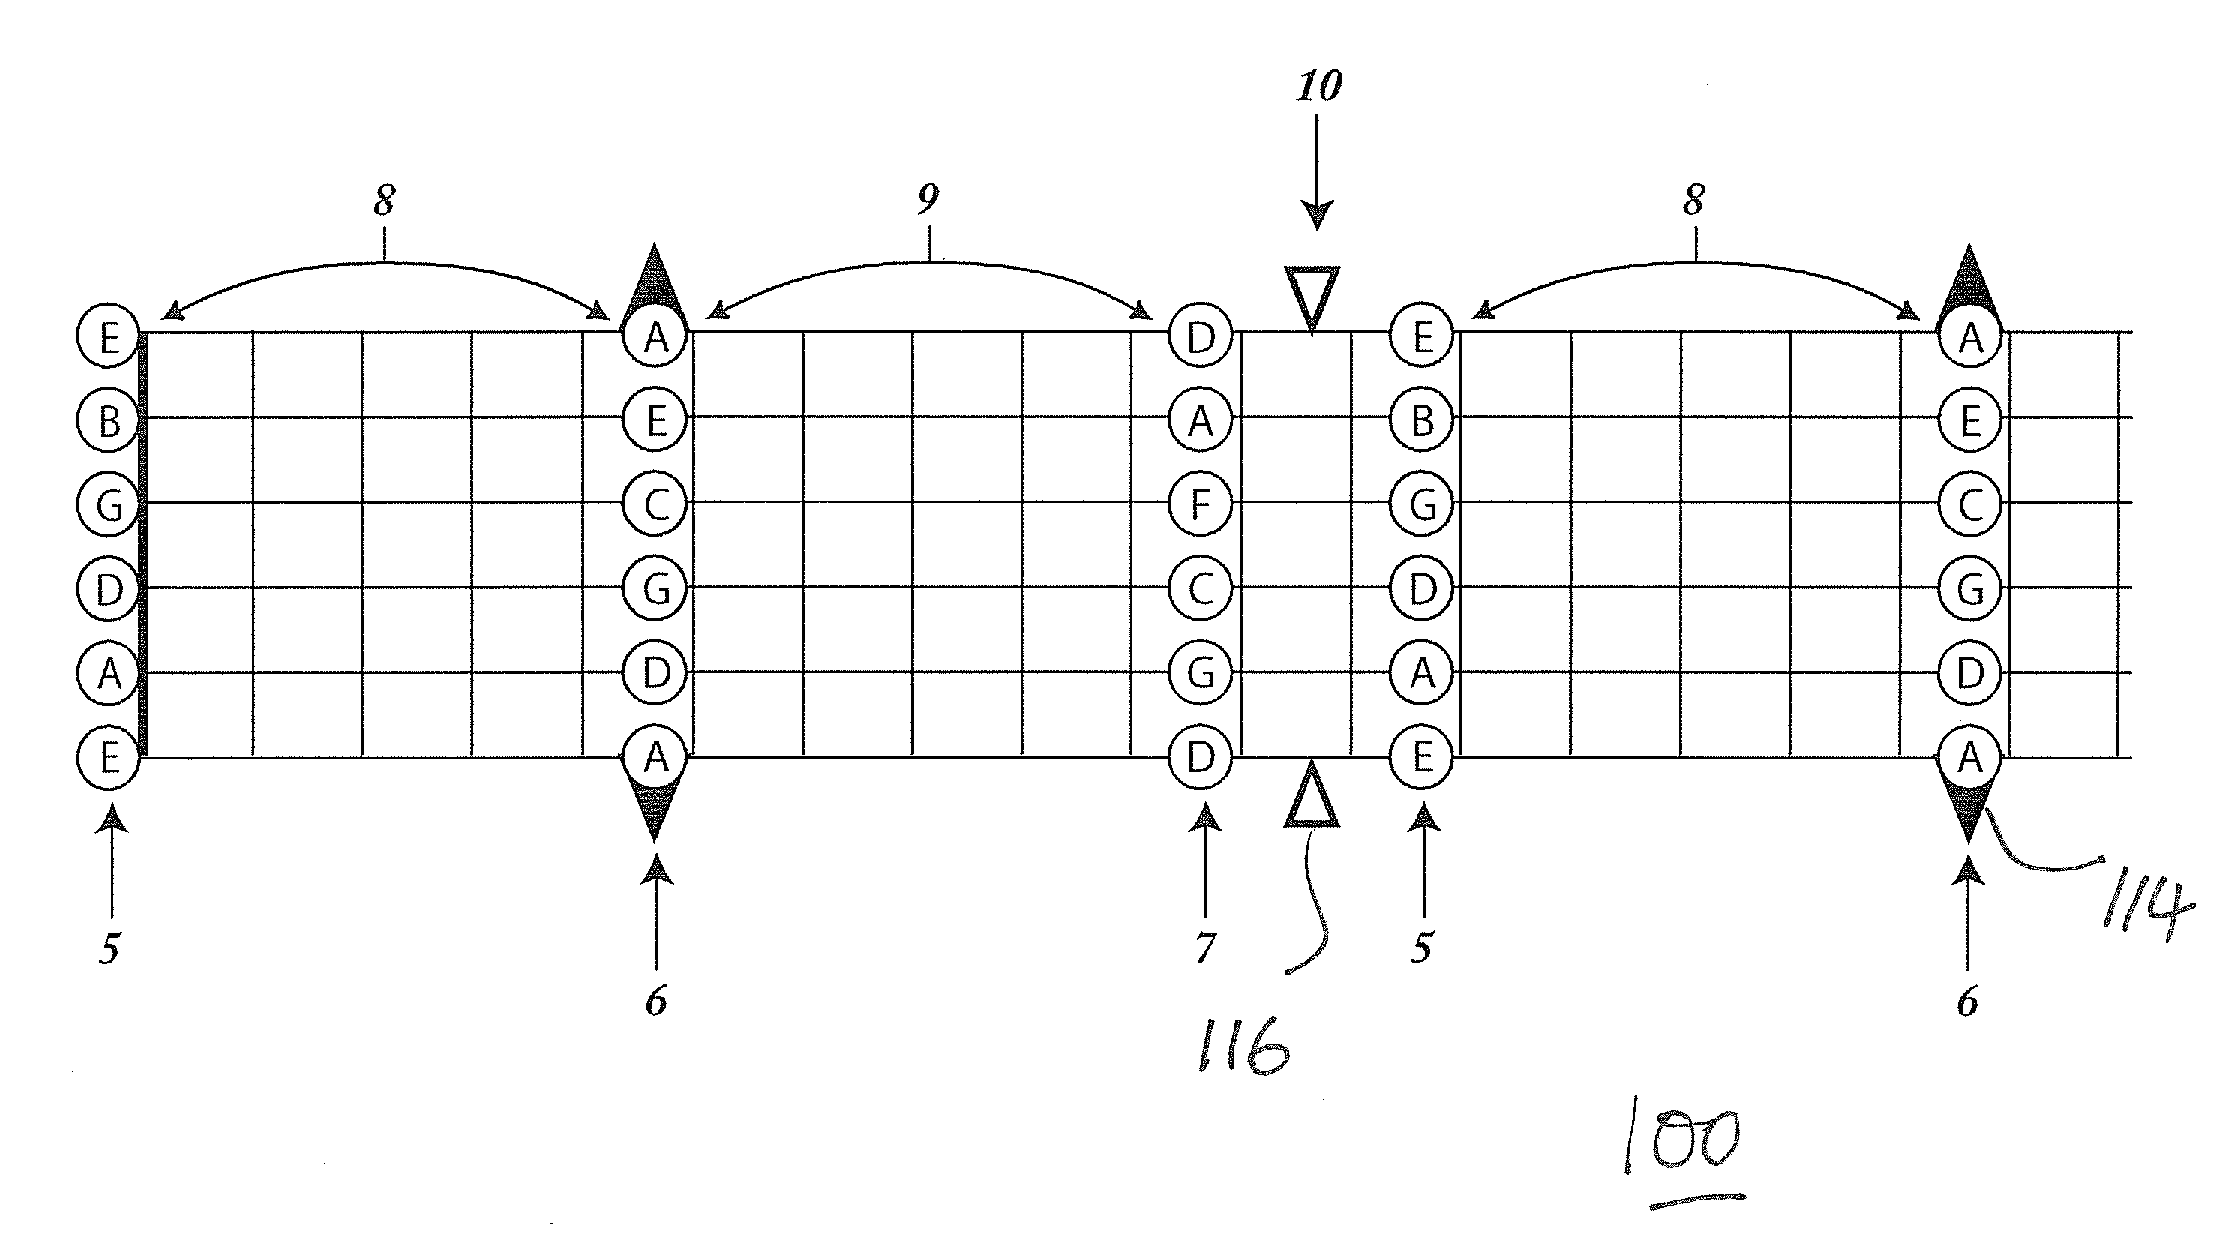 Diatonic mapping system of the guitar fretboard